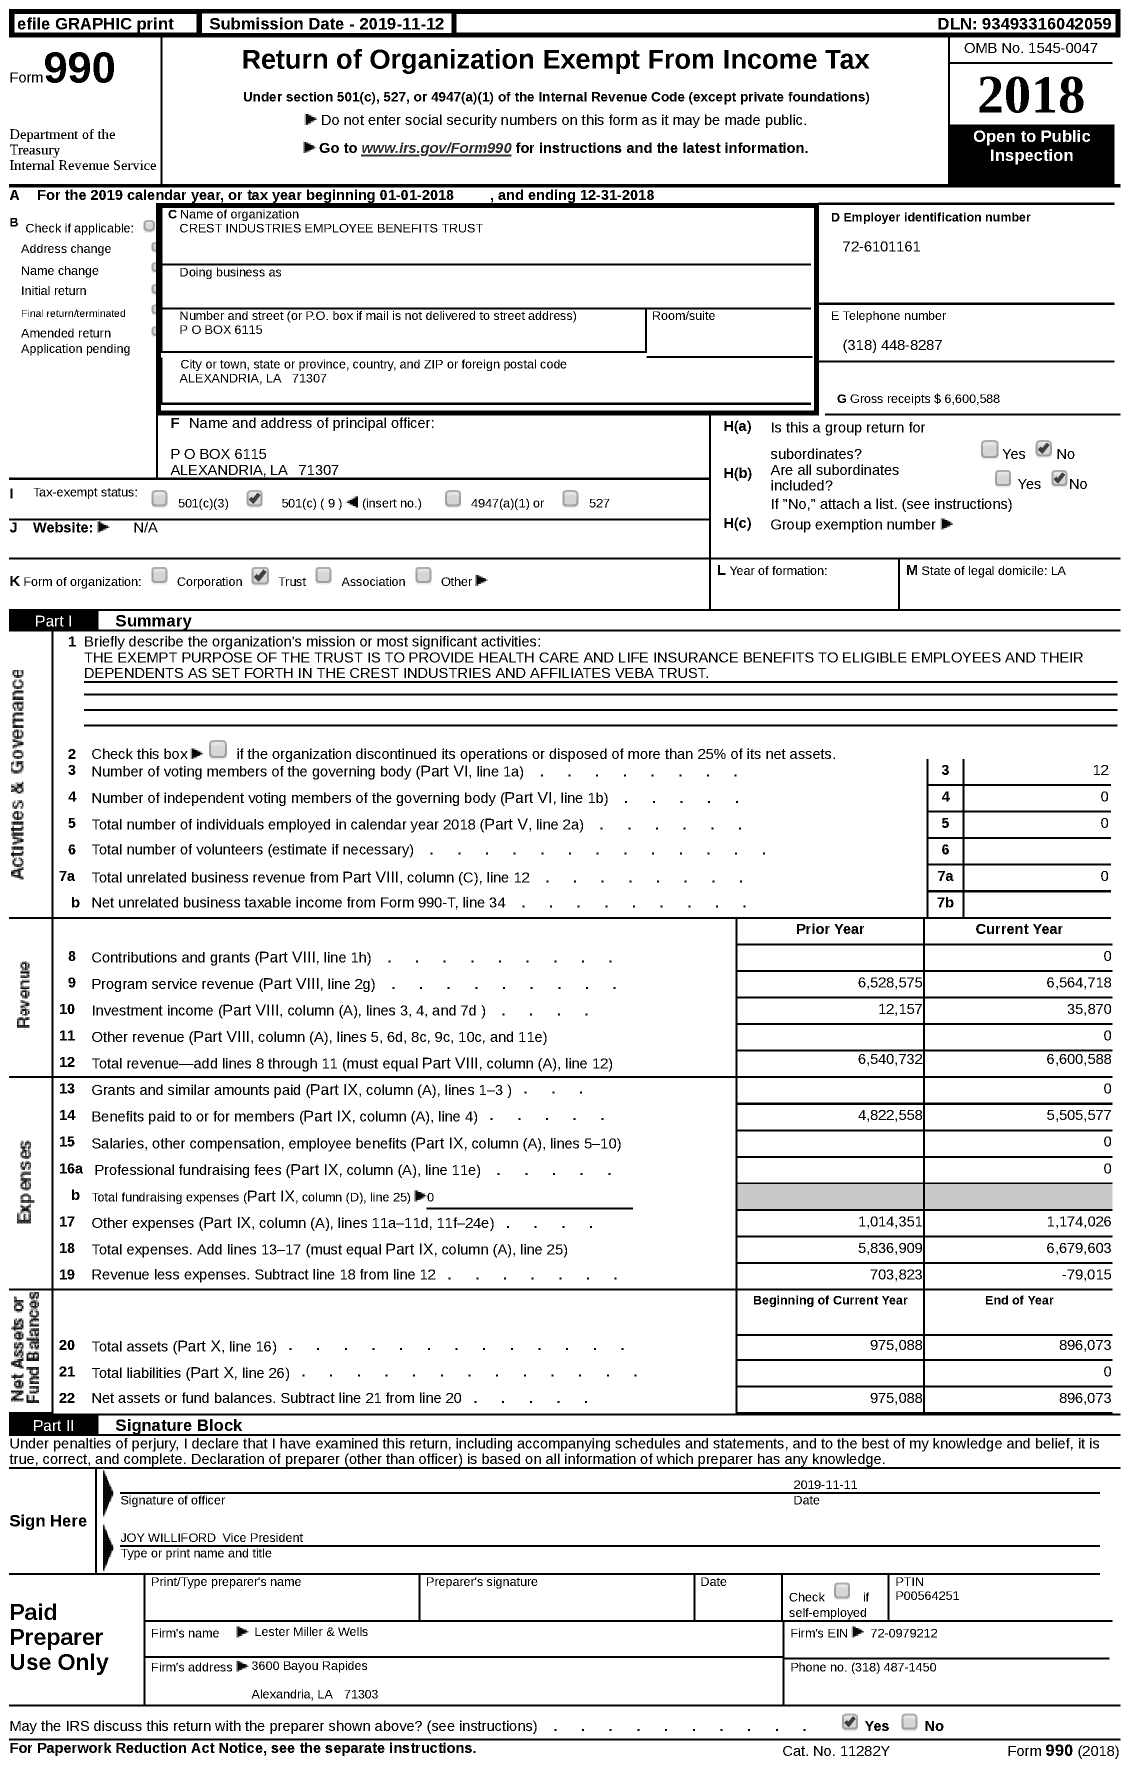 Image of first page of 2018 Form 990 for Crest Industries Employee Benefits Trust